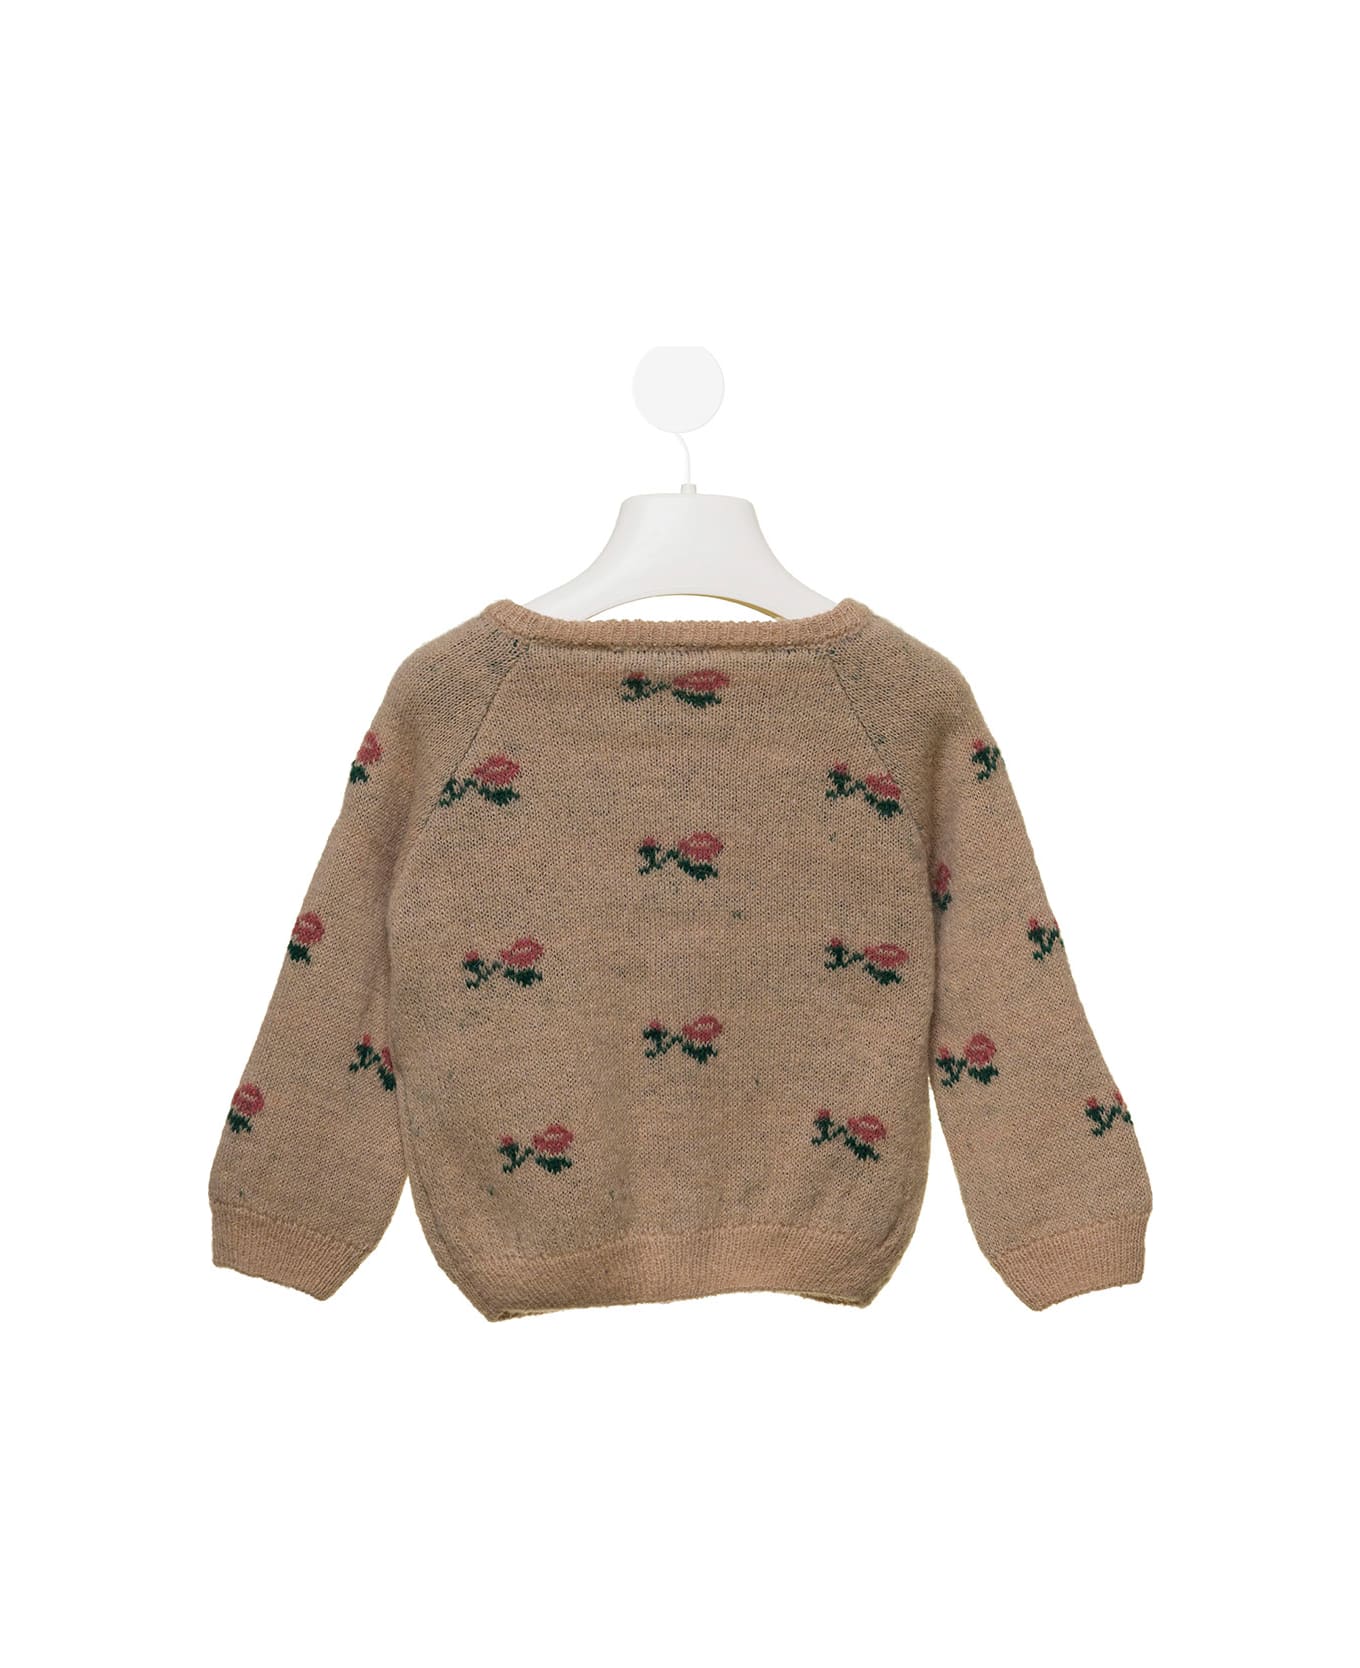 Emile Et Ida Kids Baby Girl's Brown Cardigan With Floral Embroidery - Beige